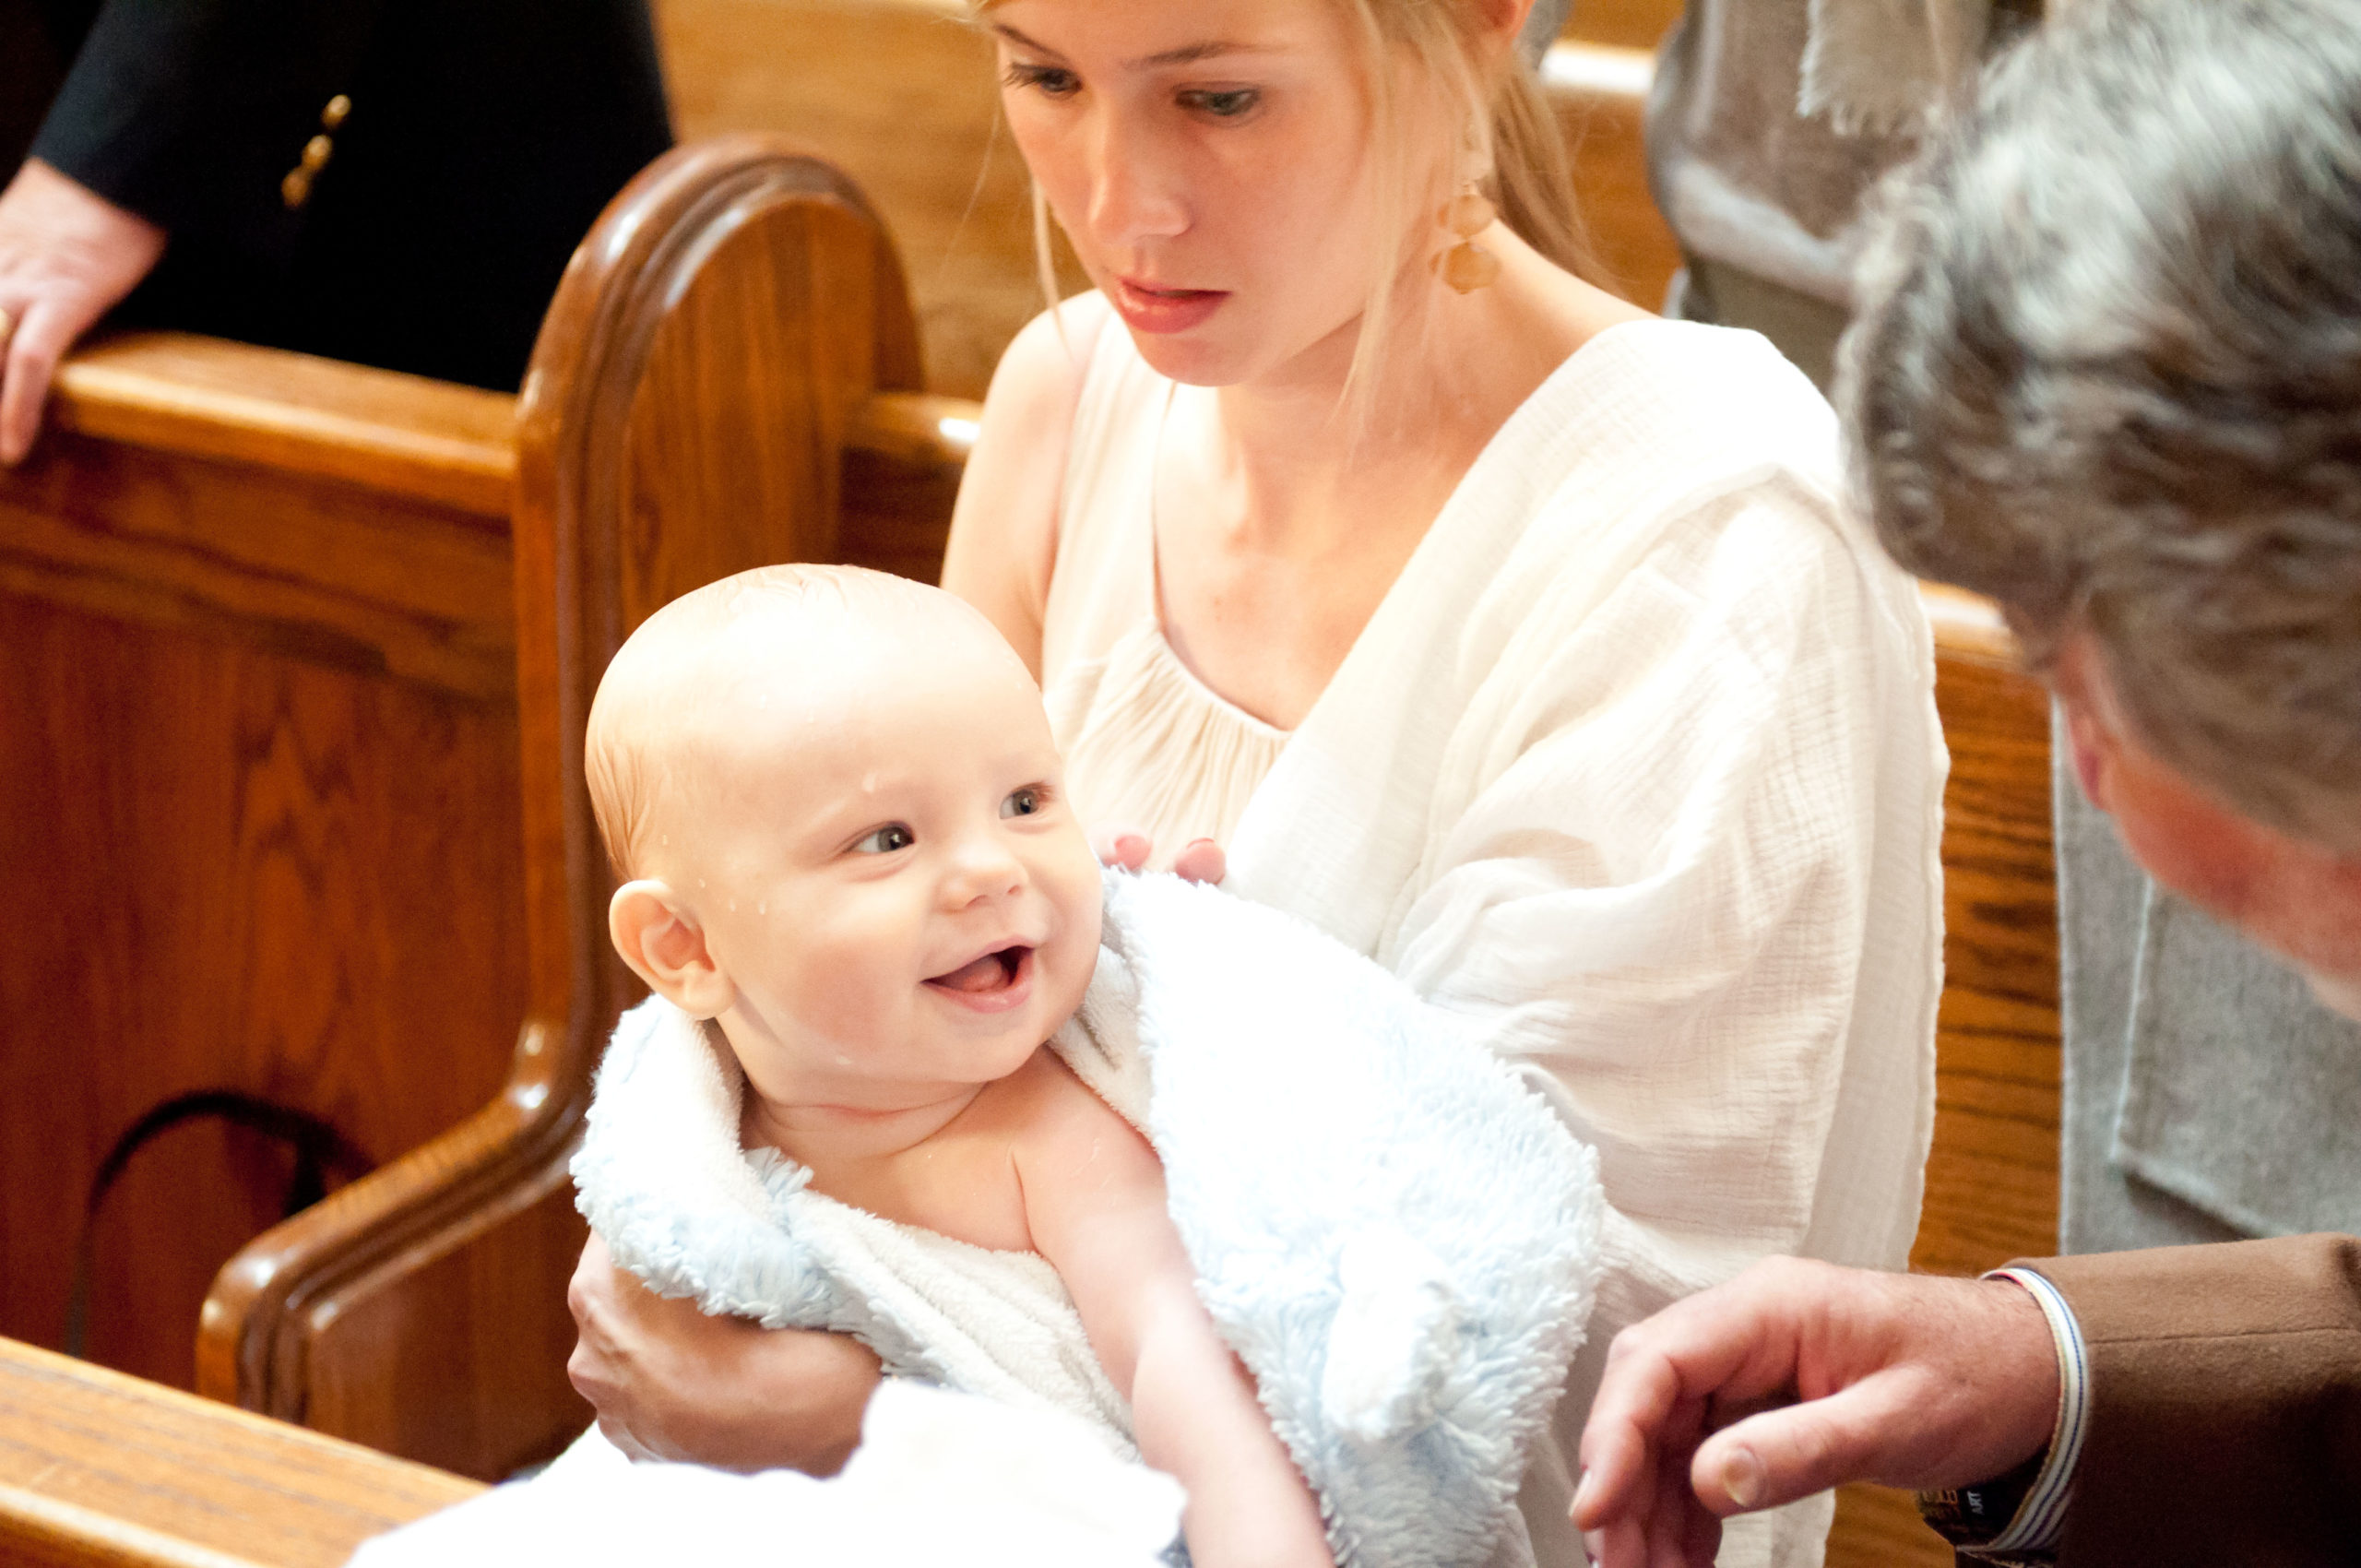 Mom holding baby after baptized